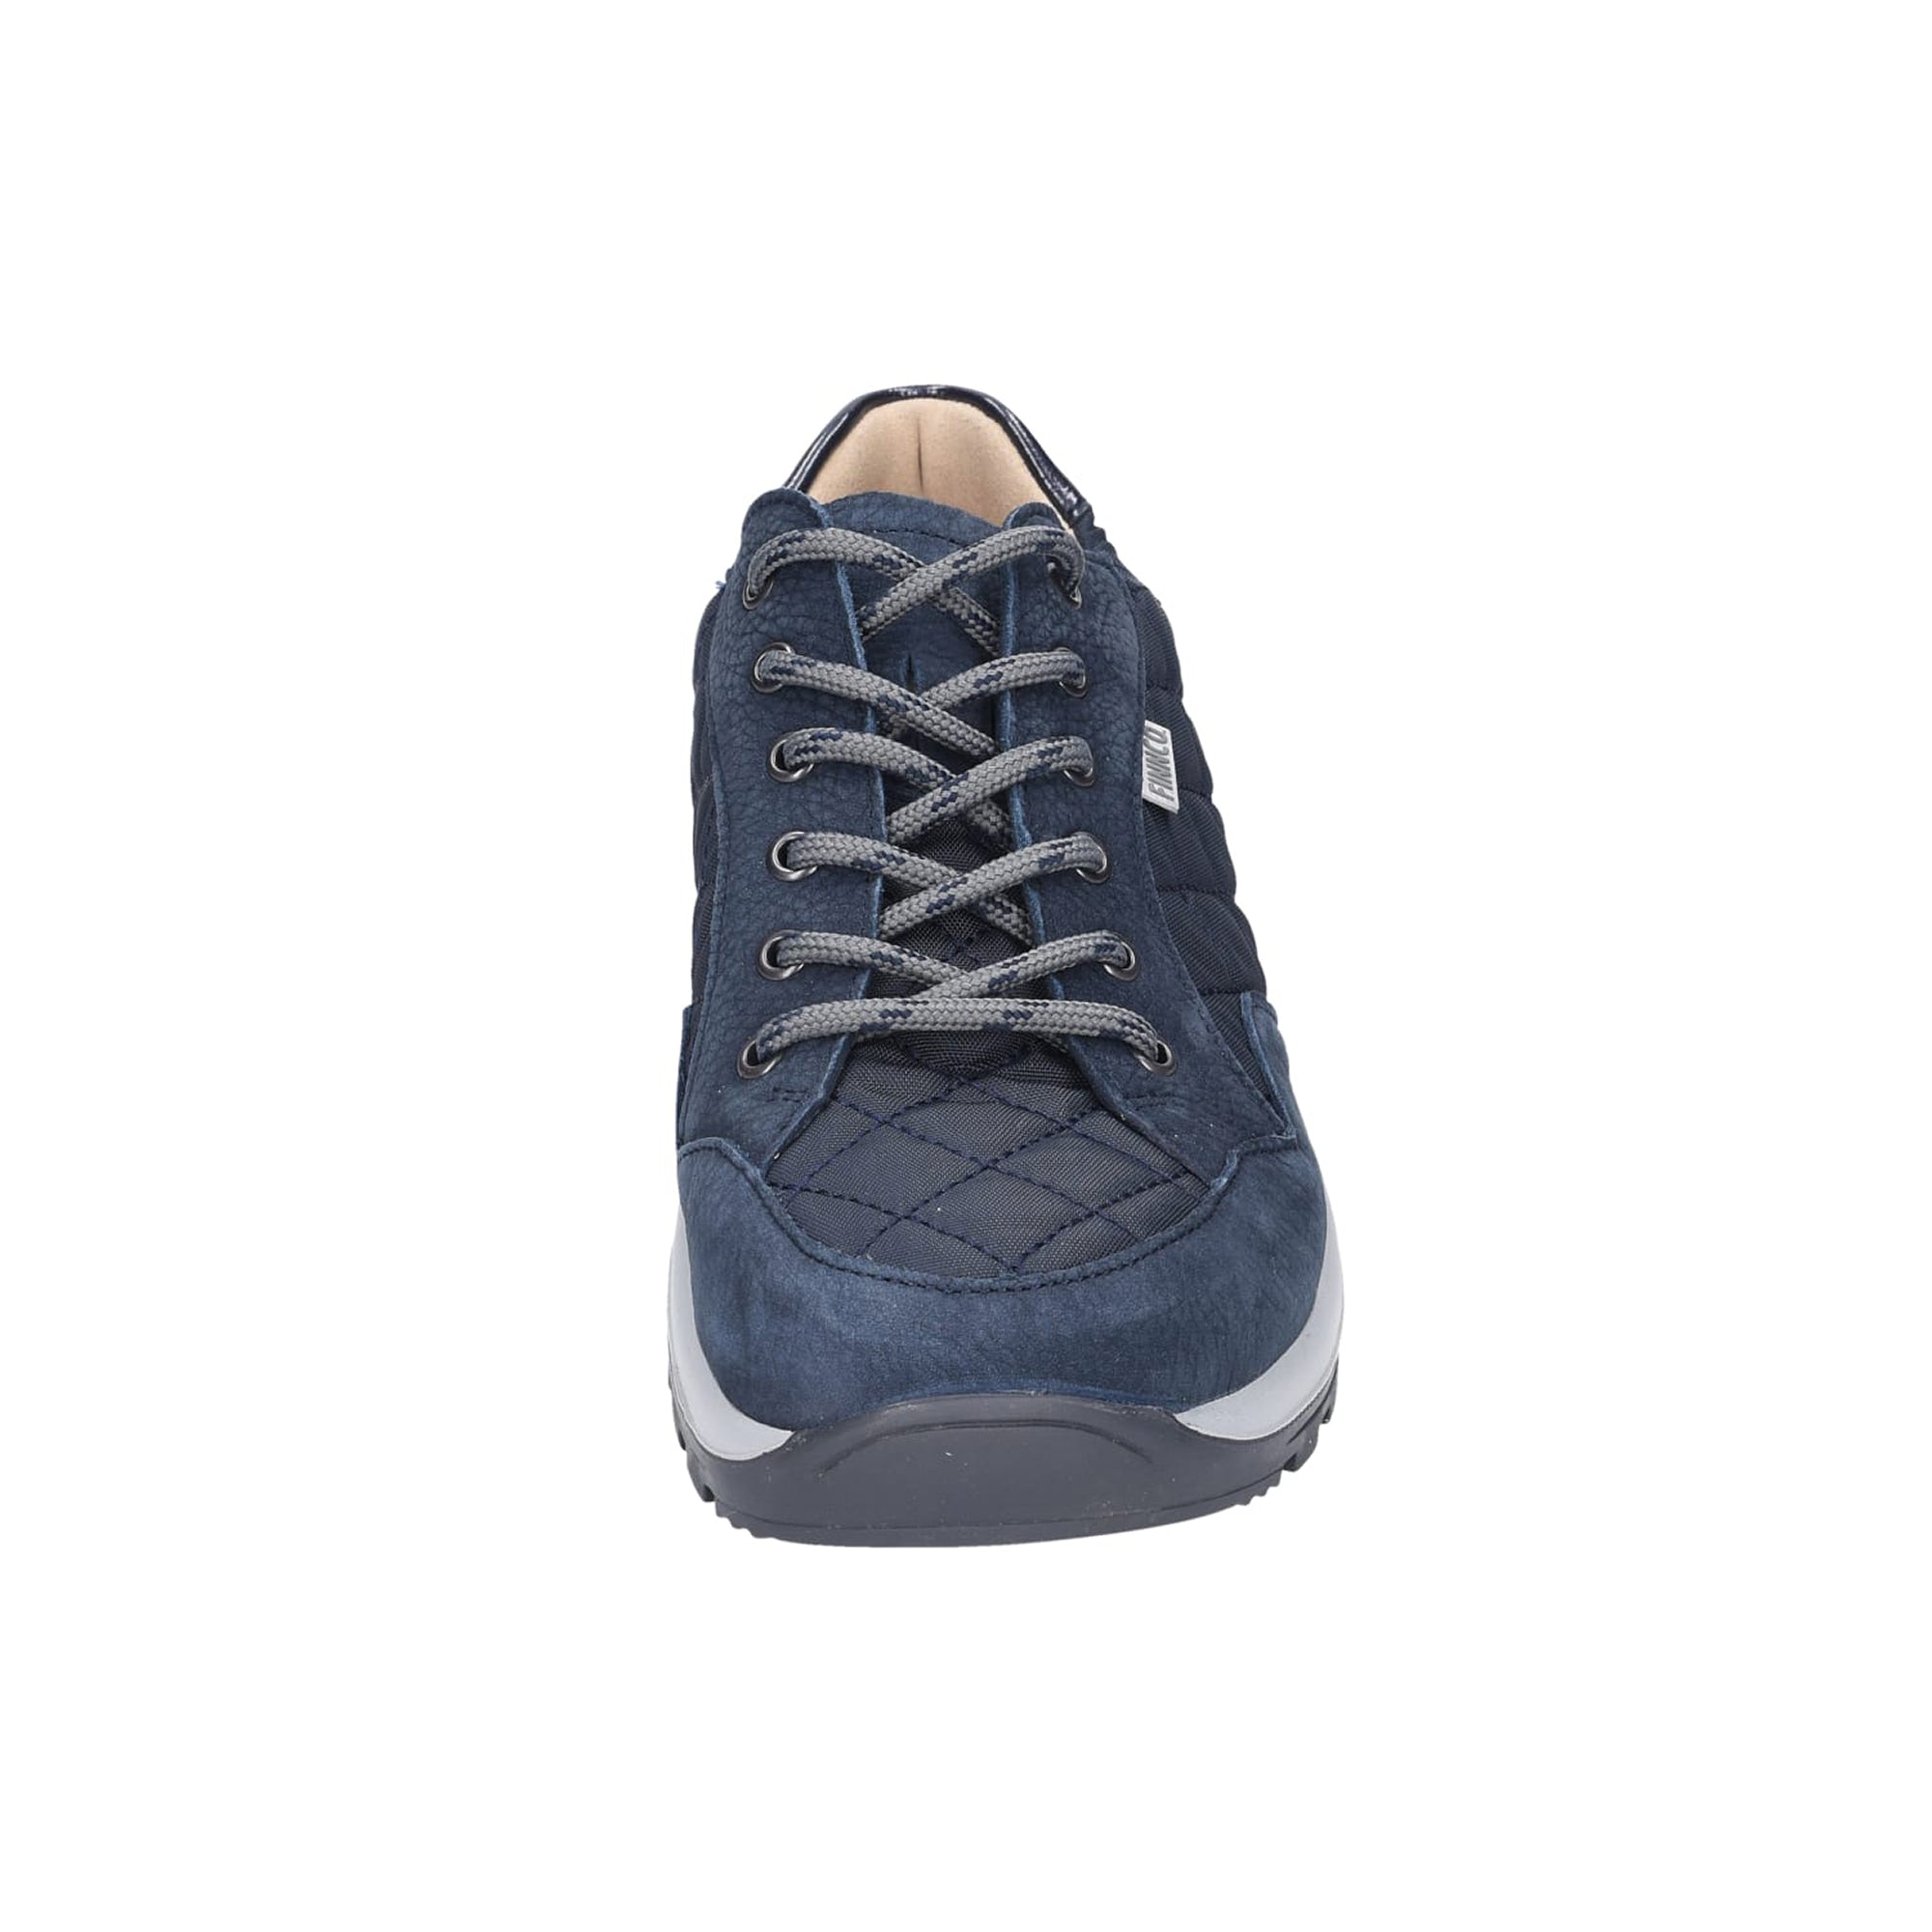 Finn Comfort Tessin Women's Leather/Nylon Sneakers - Marine/Atlantic Blue, Comfortable Lace-up Shoes with Shock Absorber